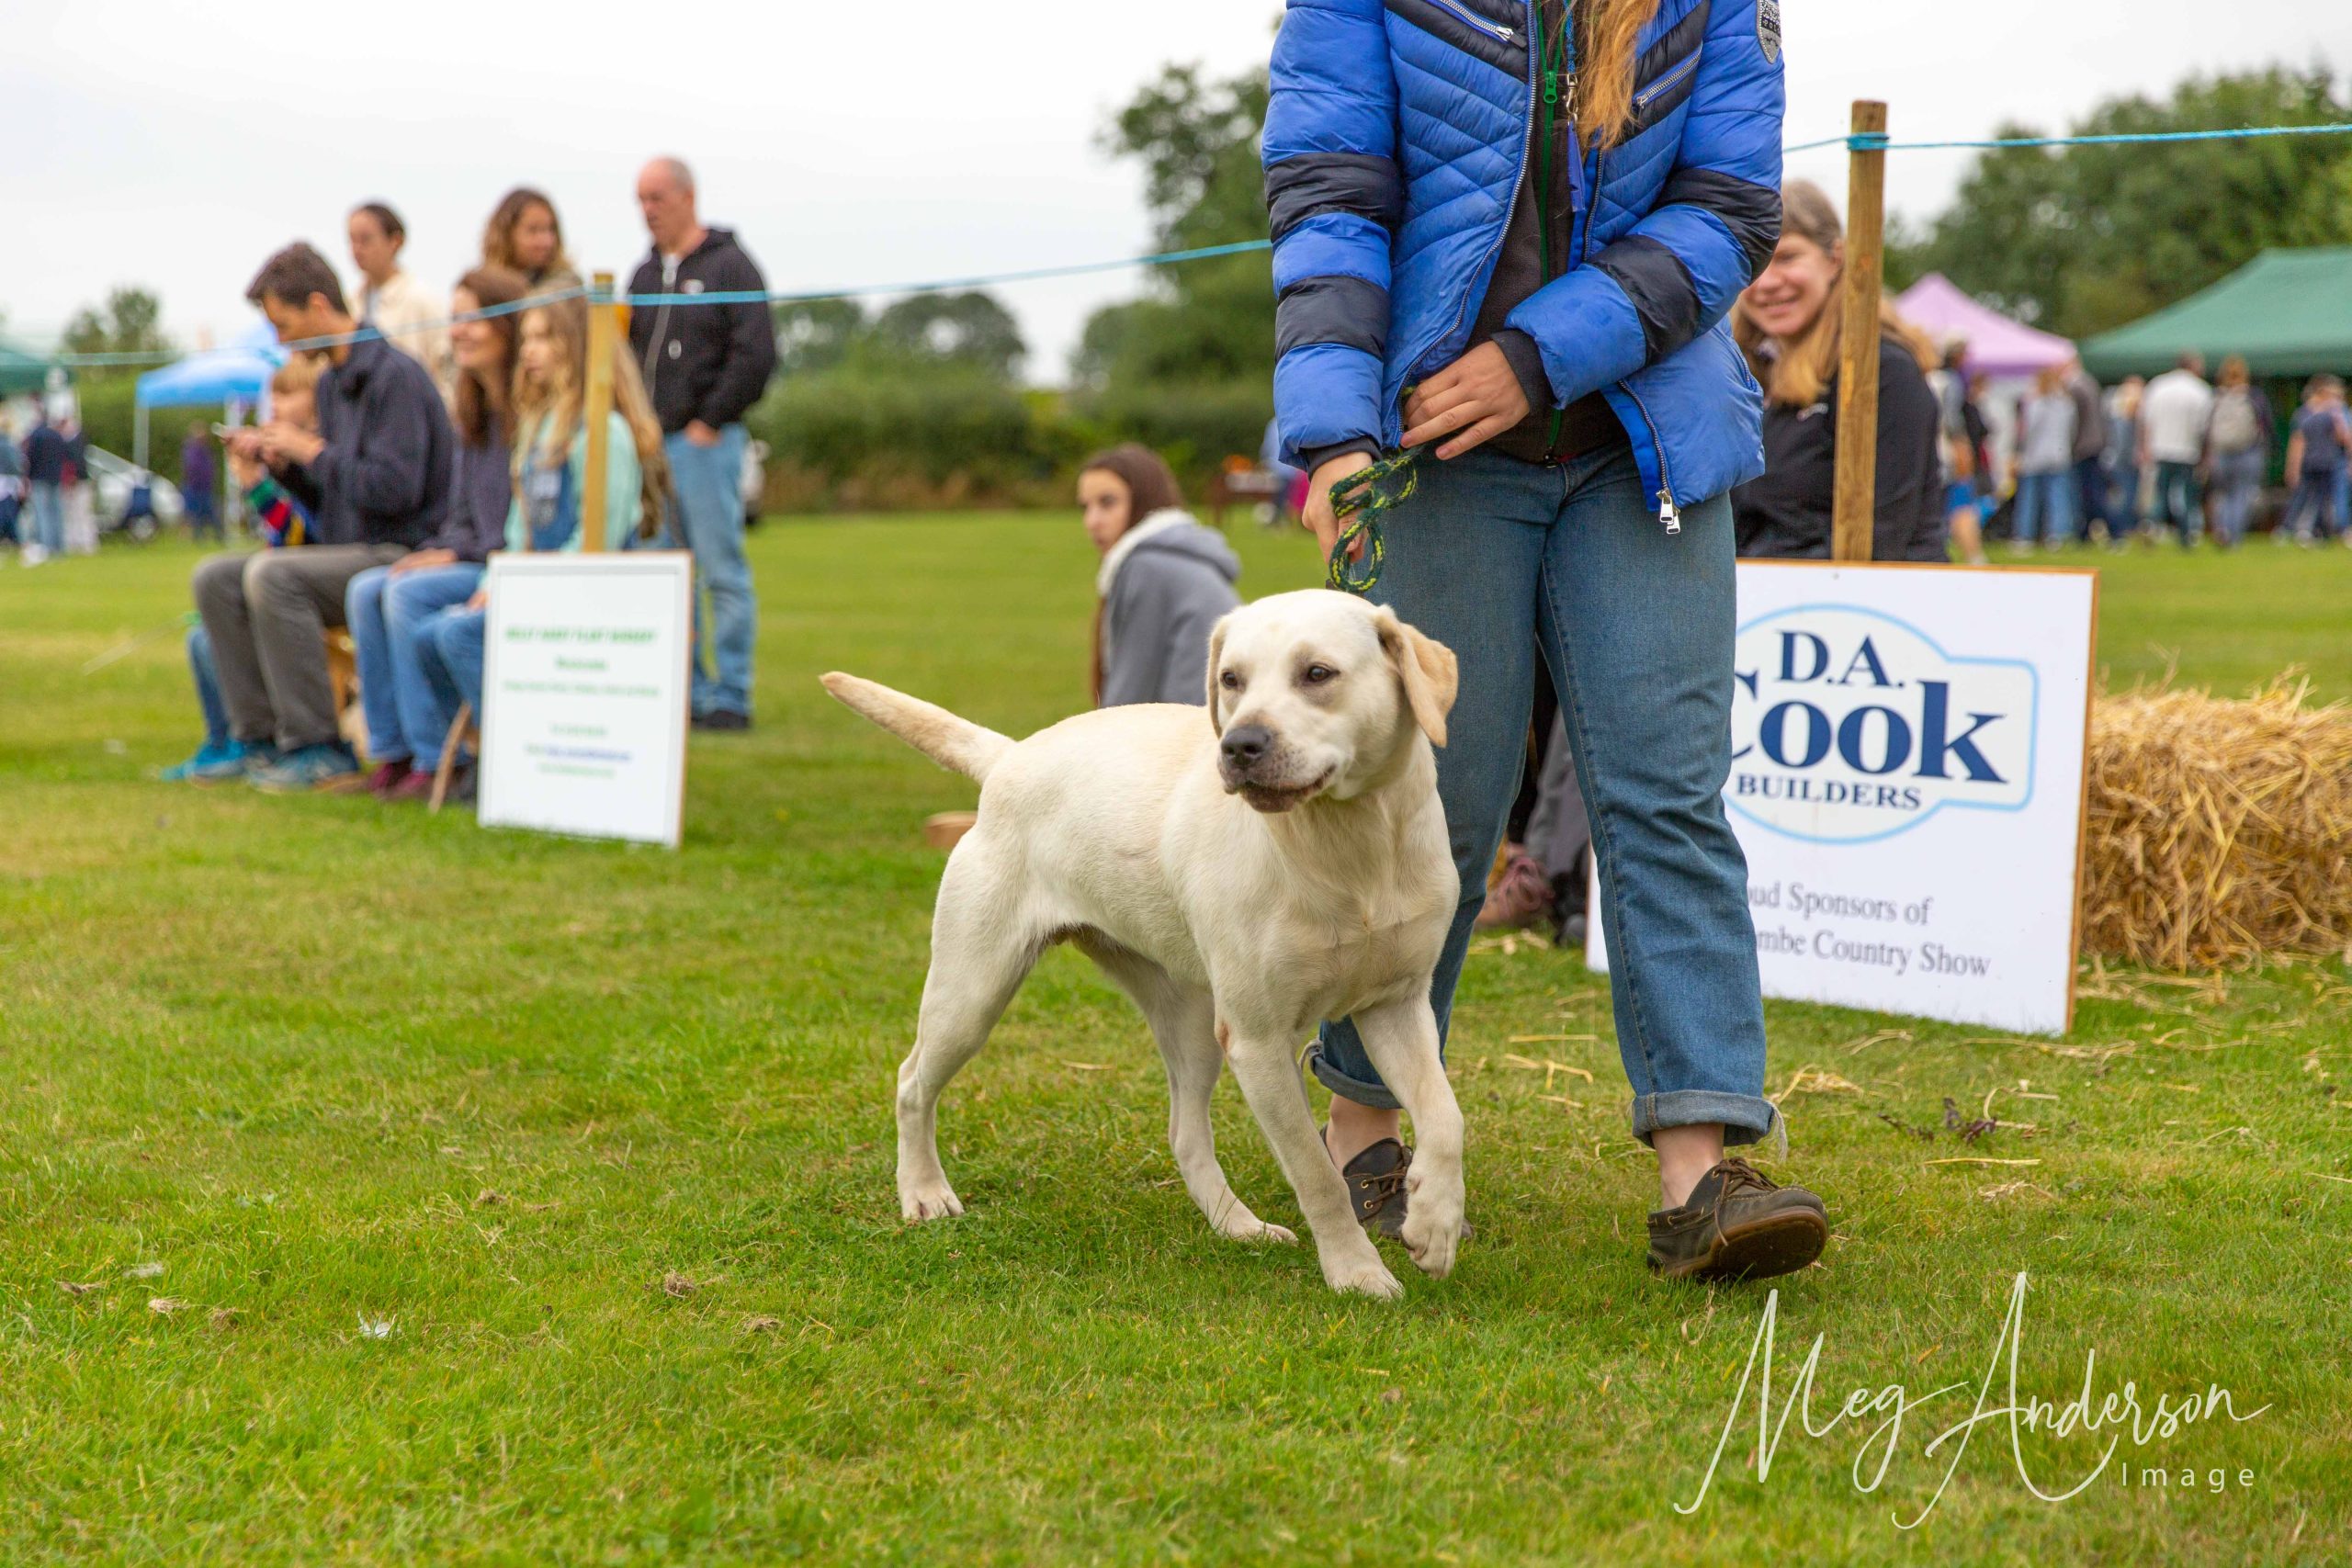 A dog calmly walking around the dog show ring